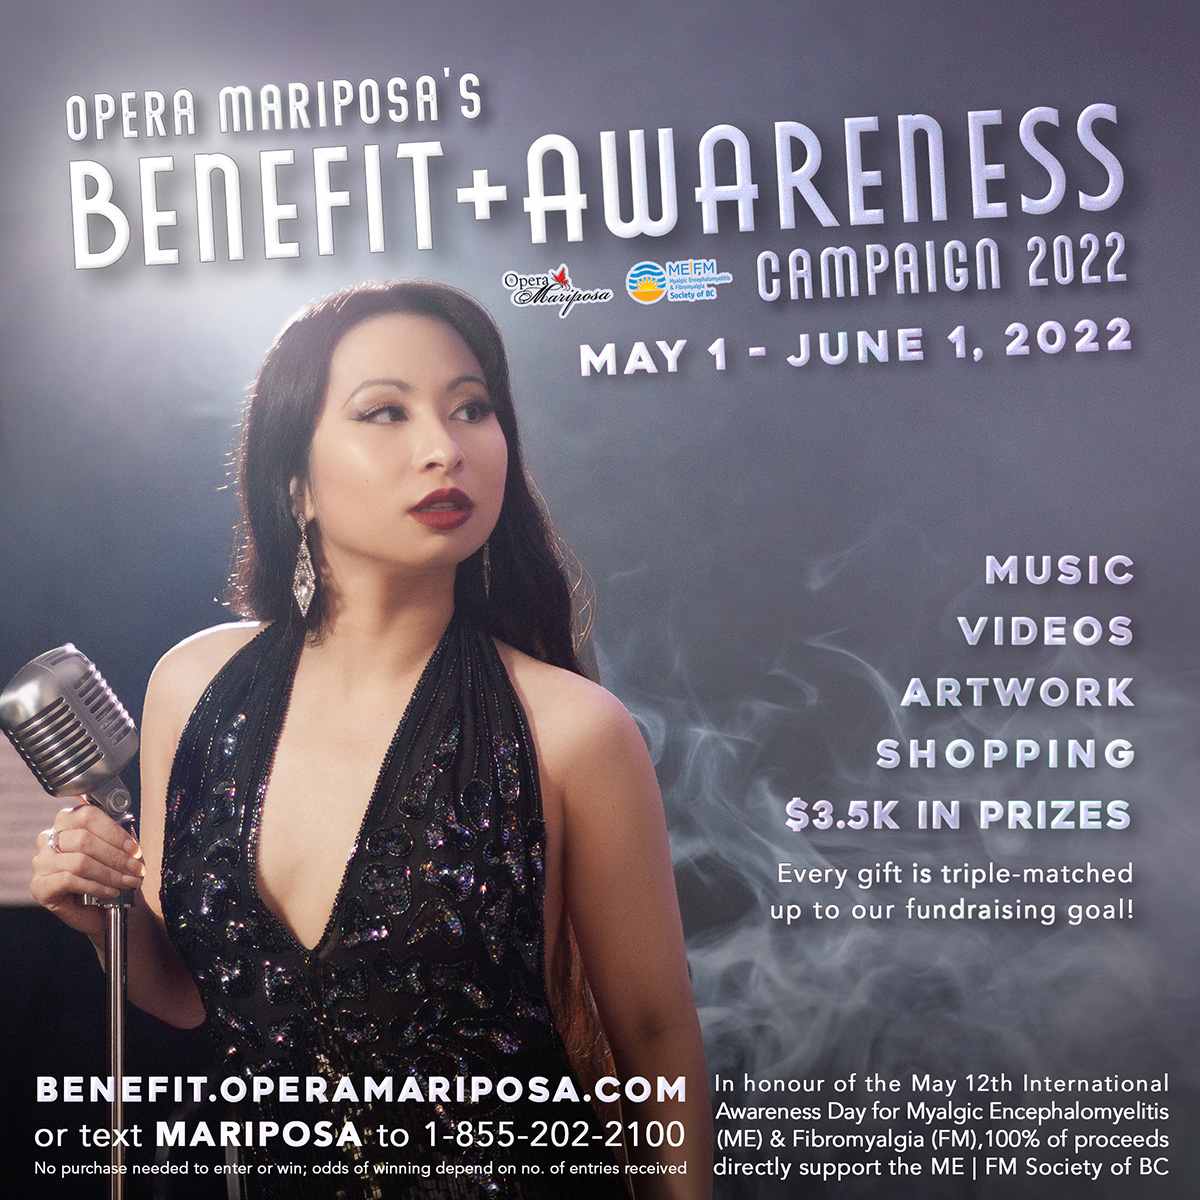 An artistically lit Asian Canadian woman in a black sequin dress holds a vintage microphone, surrounded by mist. A vintage font reads, Opera Mariposa's Benefit and Awareness Campaign 2022 - May 1-June 1, 2022. Music, videos, artwork, shopping, prizes. Every gift is triple-matched up to our fundraising goal! Benefit.OperaMariposa.com or text Mariposa to 1-855-202-2100. No purchase needed to enter or win; odds of winning depend on number of entries received. To honour the May 12th International Awareness Day for Myalgic Encephalomyelitis (ME) and Fibromyalgia (FM), 100% of proceeds support the ME & FM Society of BC.